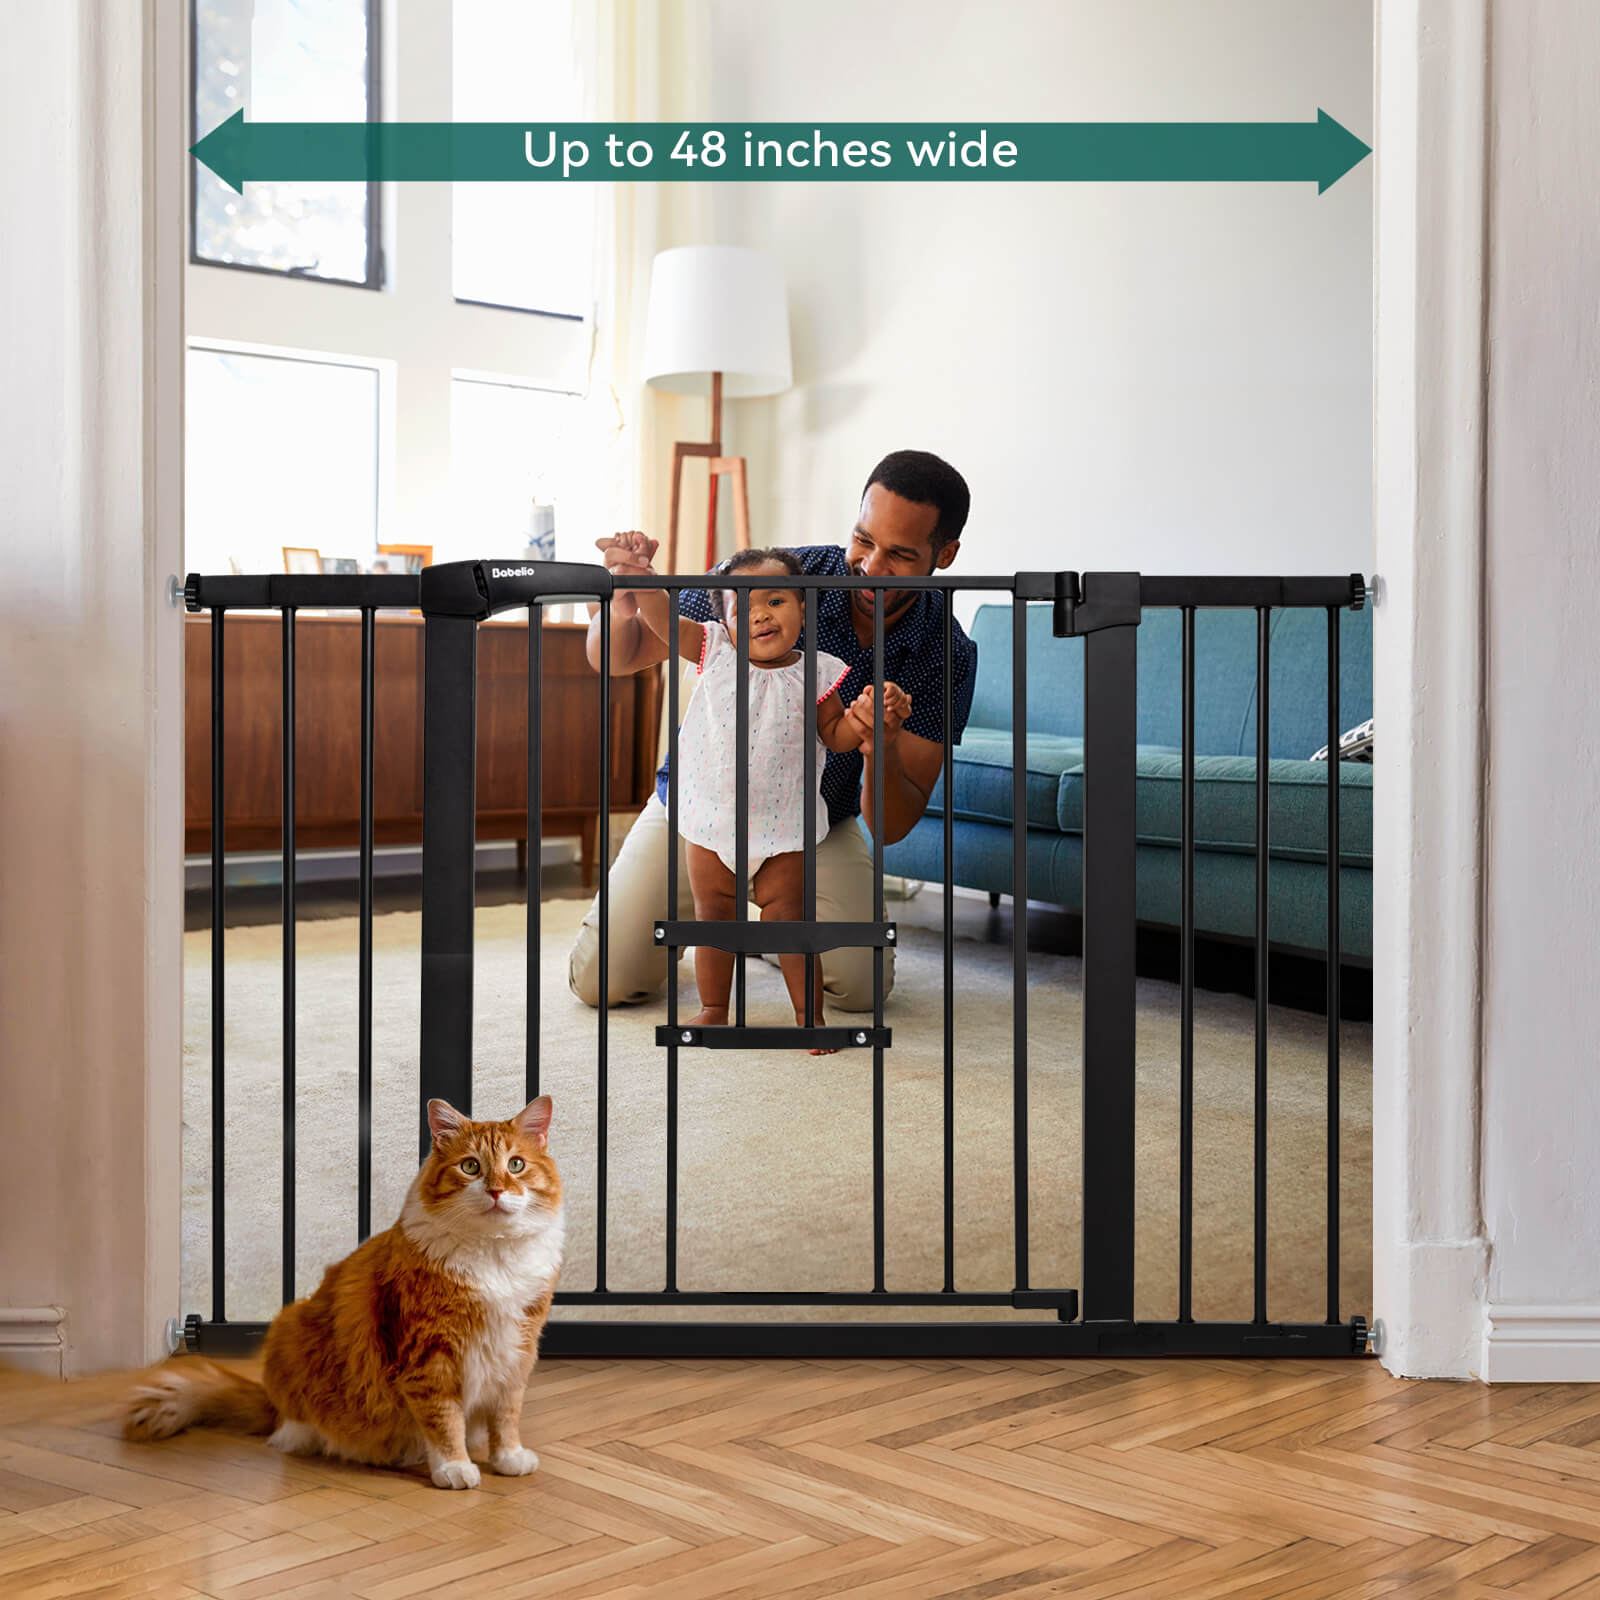 BABELIO Adjustable 29-48" Metal Baby Gate with Pet Door - Auto-Close, Dual-Swing Safety Gate for Stairs and Doorways